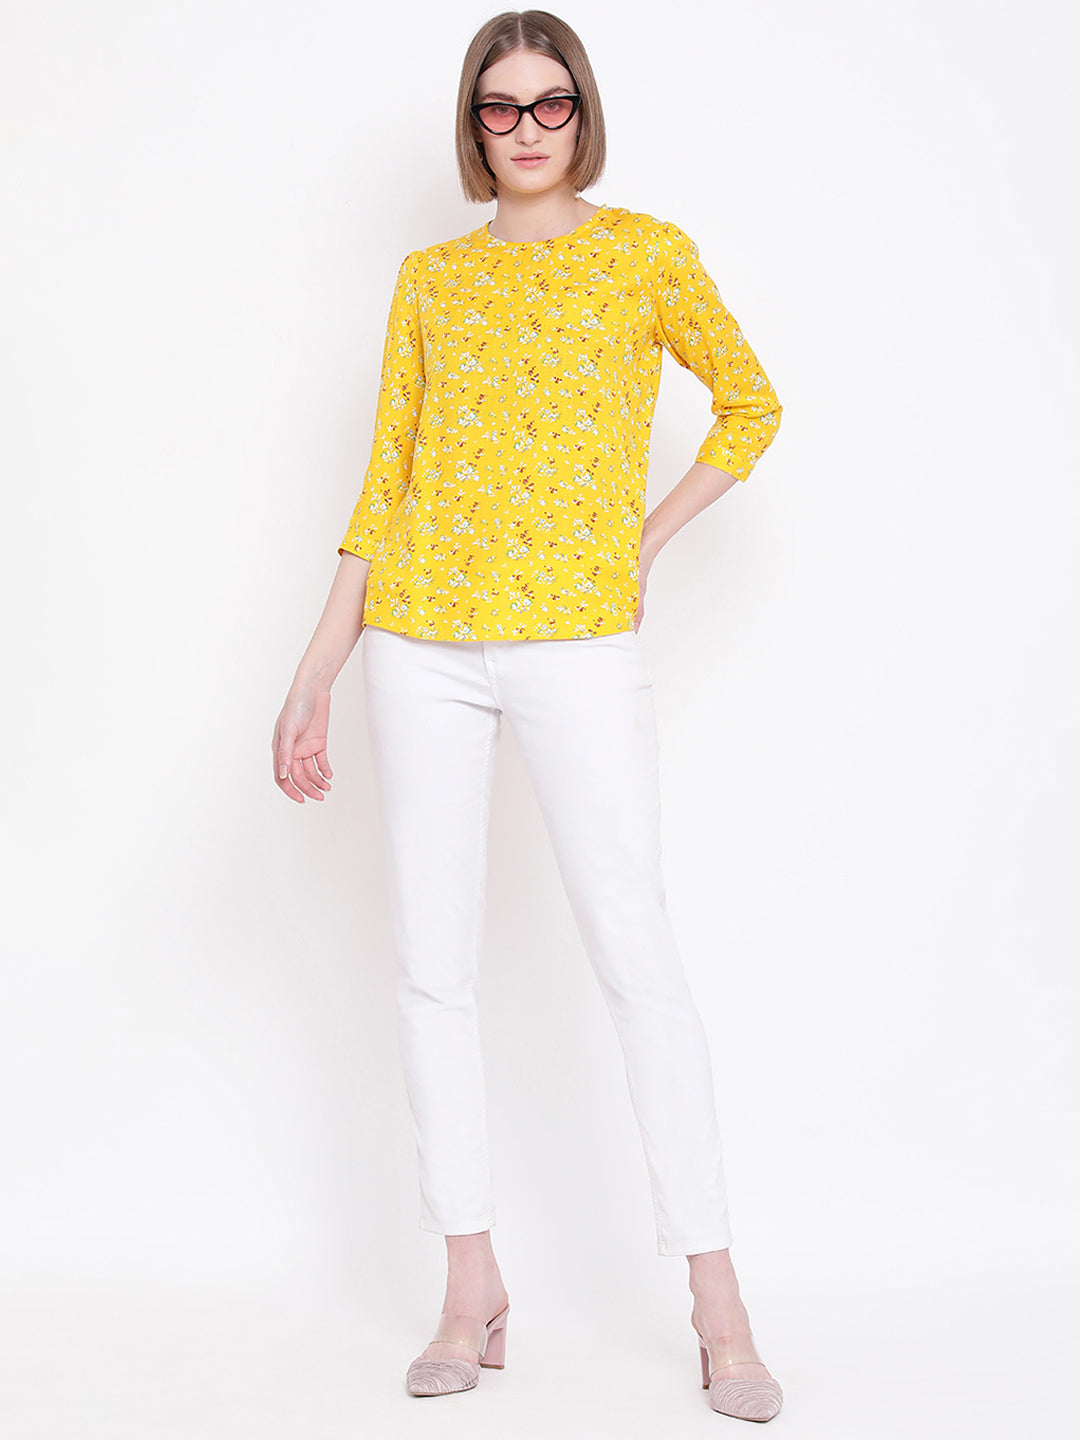 Yellow Floral Slim Fit Top - Women Tops